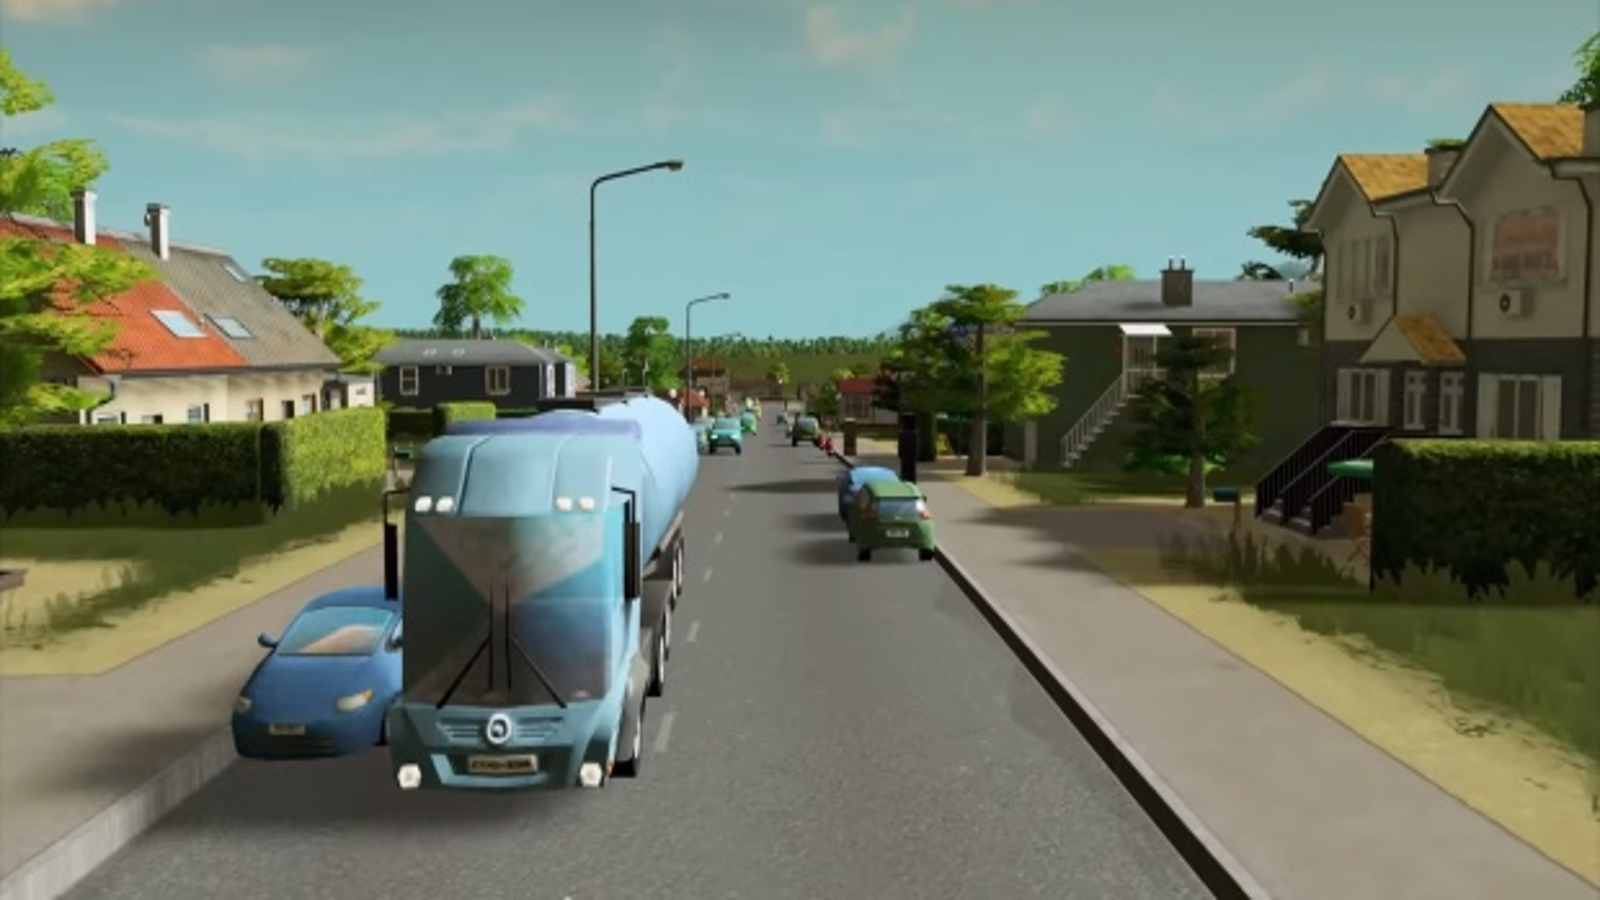 See your city up close with this Cities: Skylines mod